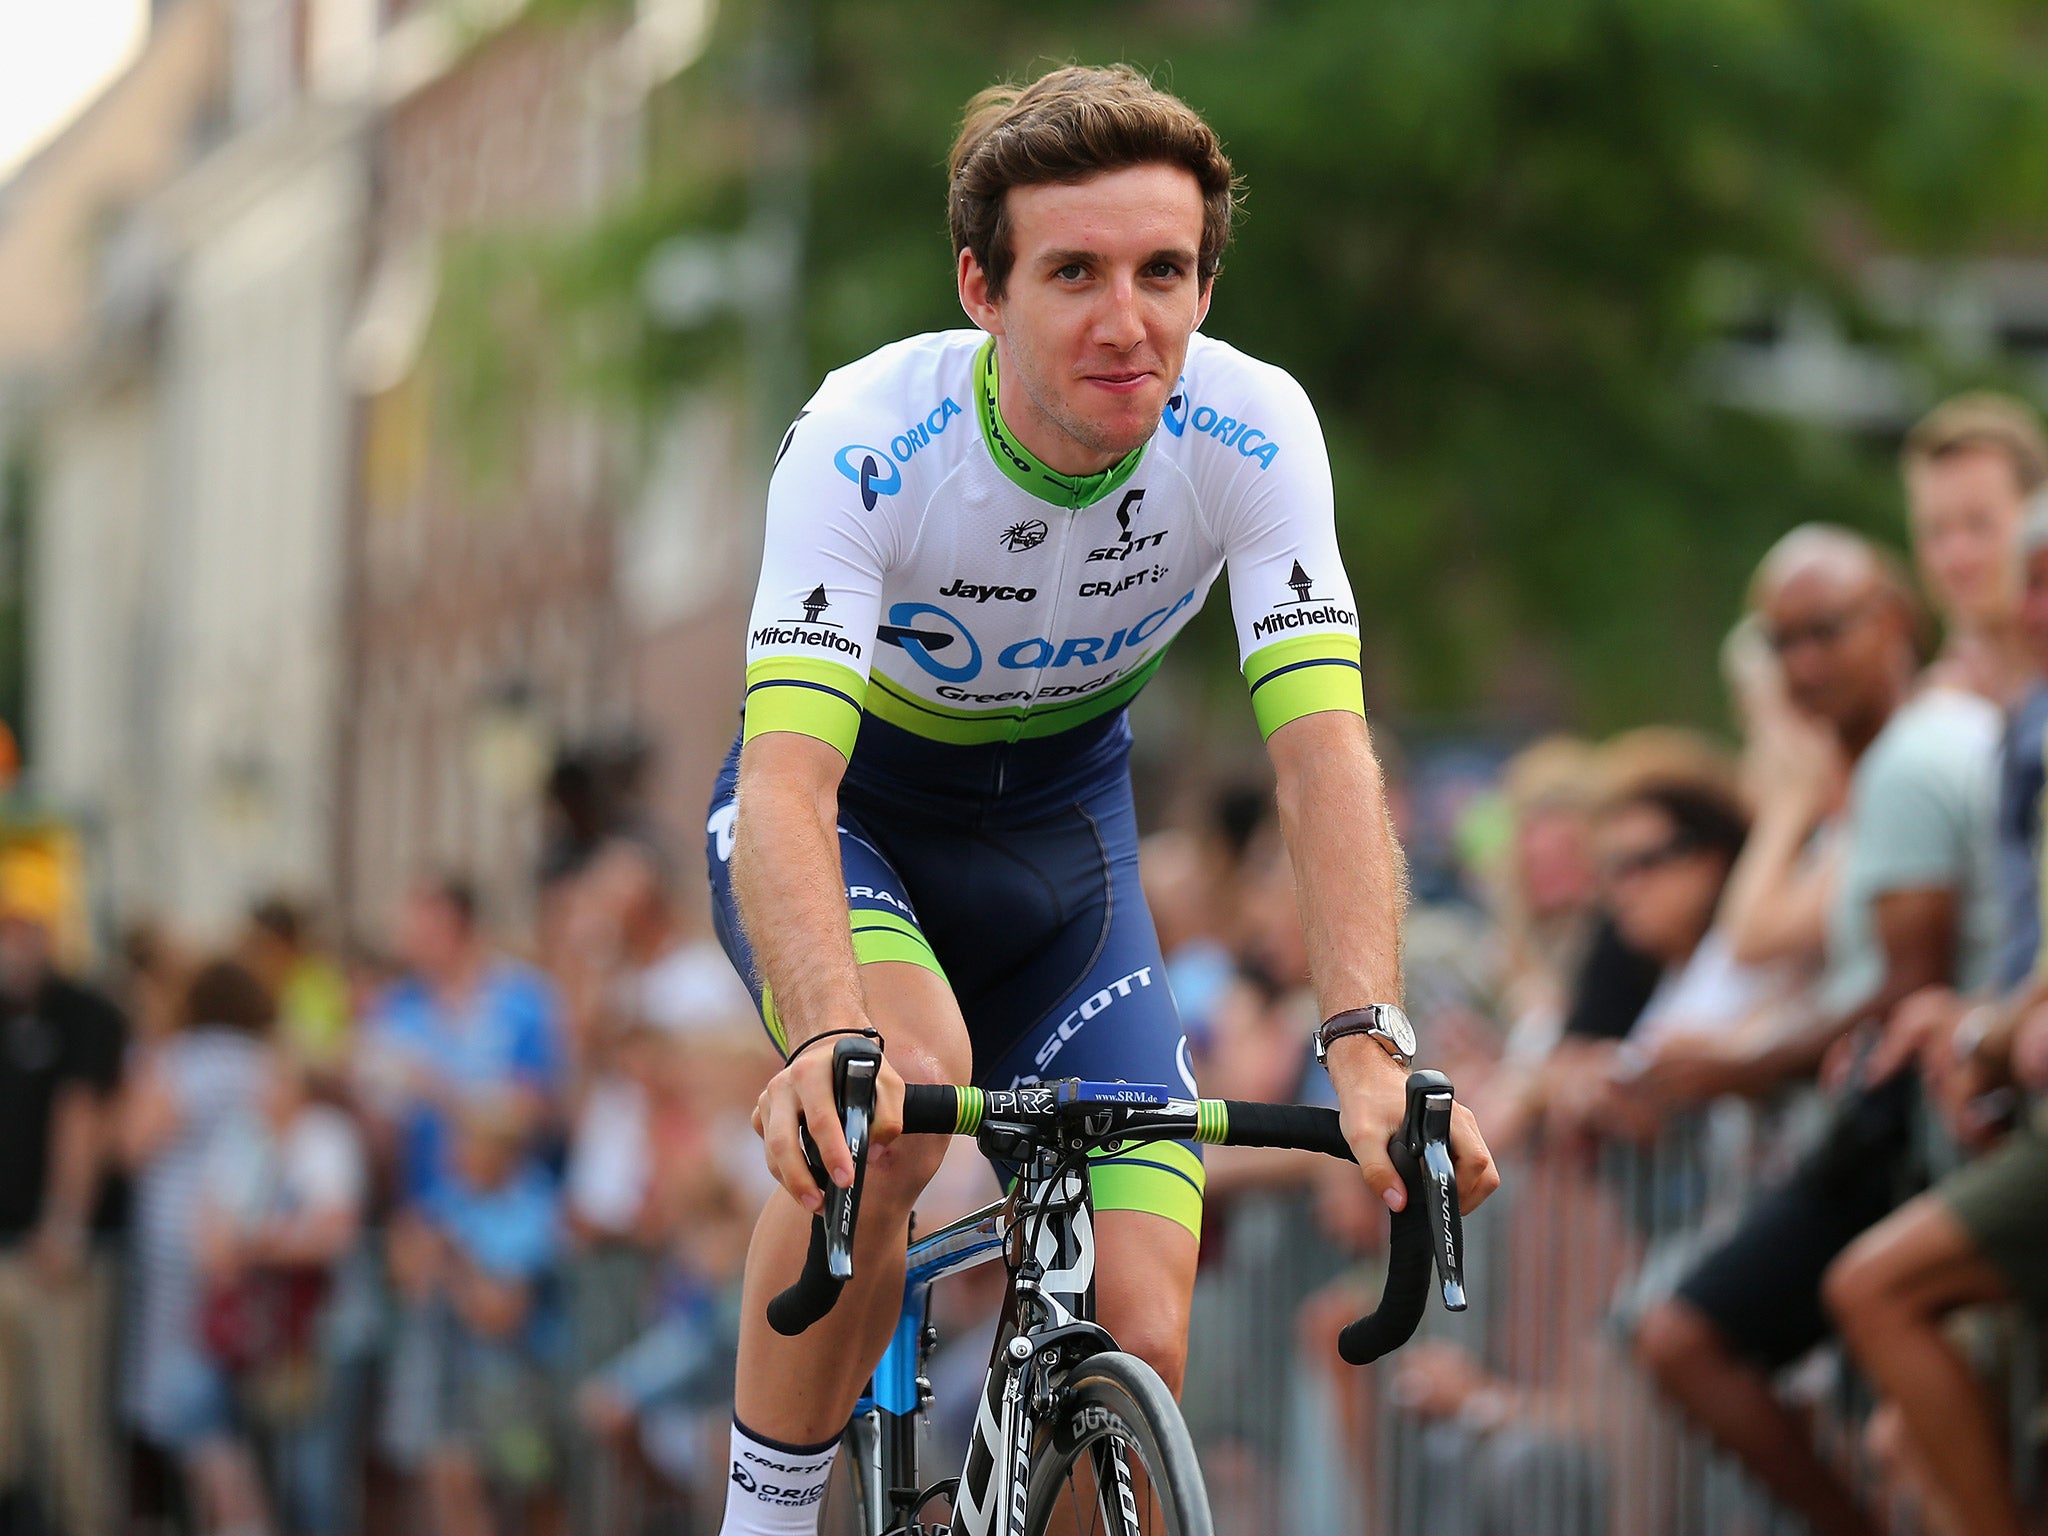 New of Simon Yates's failed drug test is claimed to have been leaked out by British Cycling